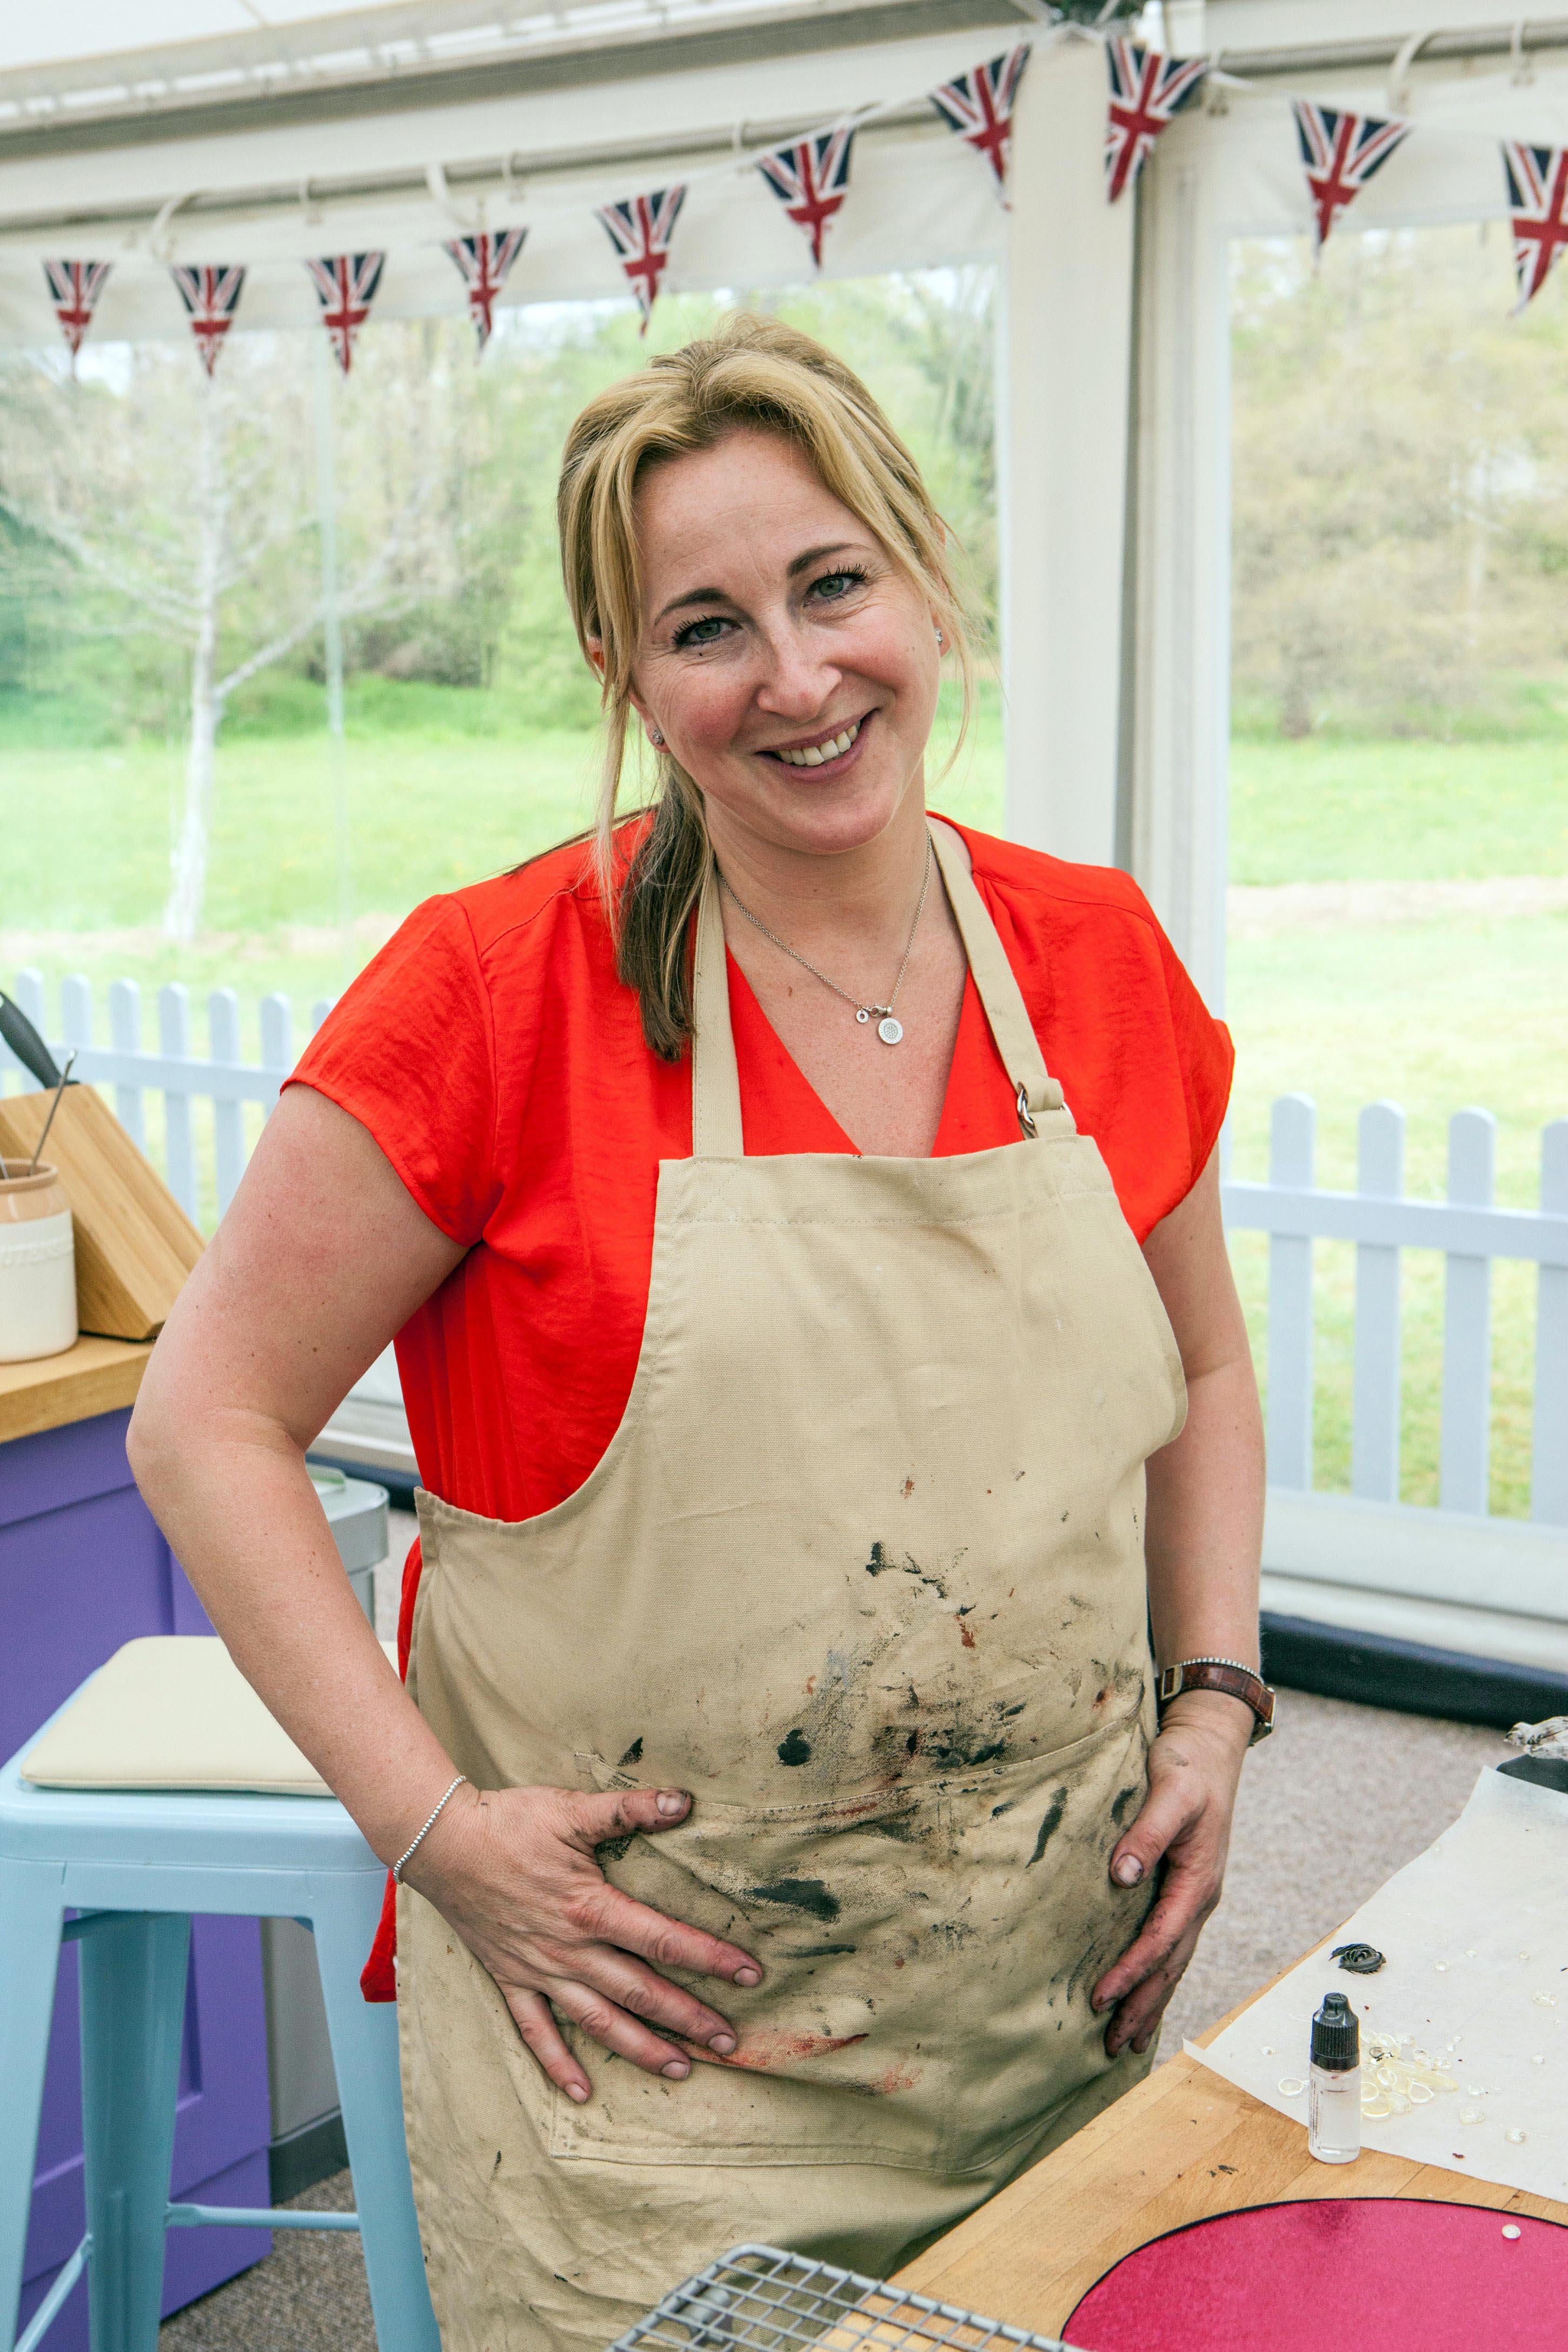 Stacey on Bake Off